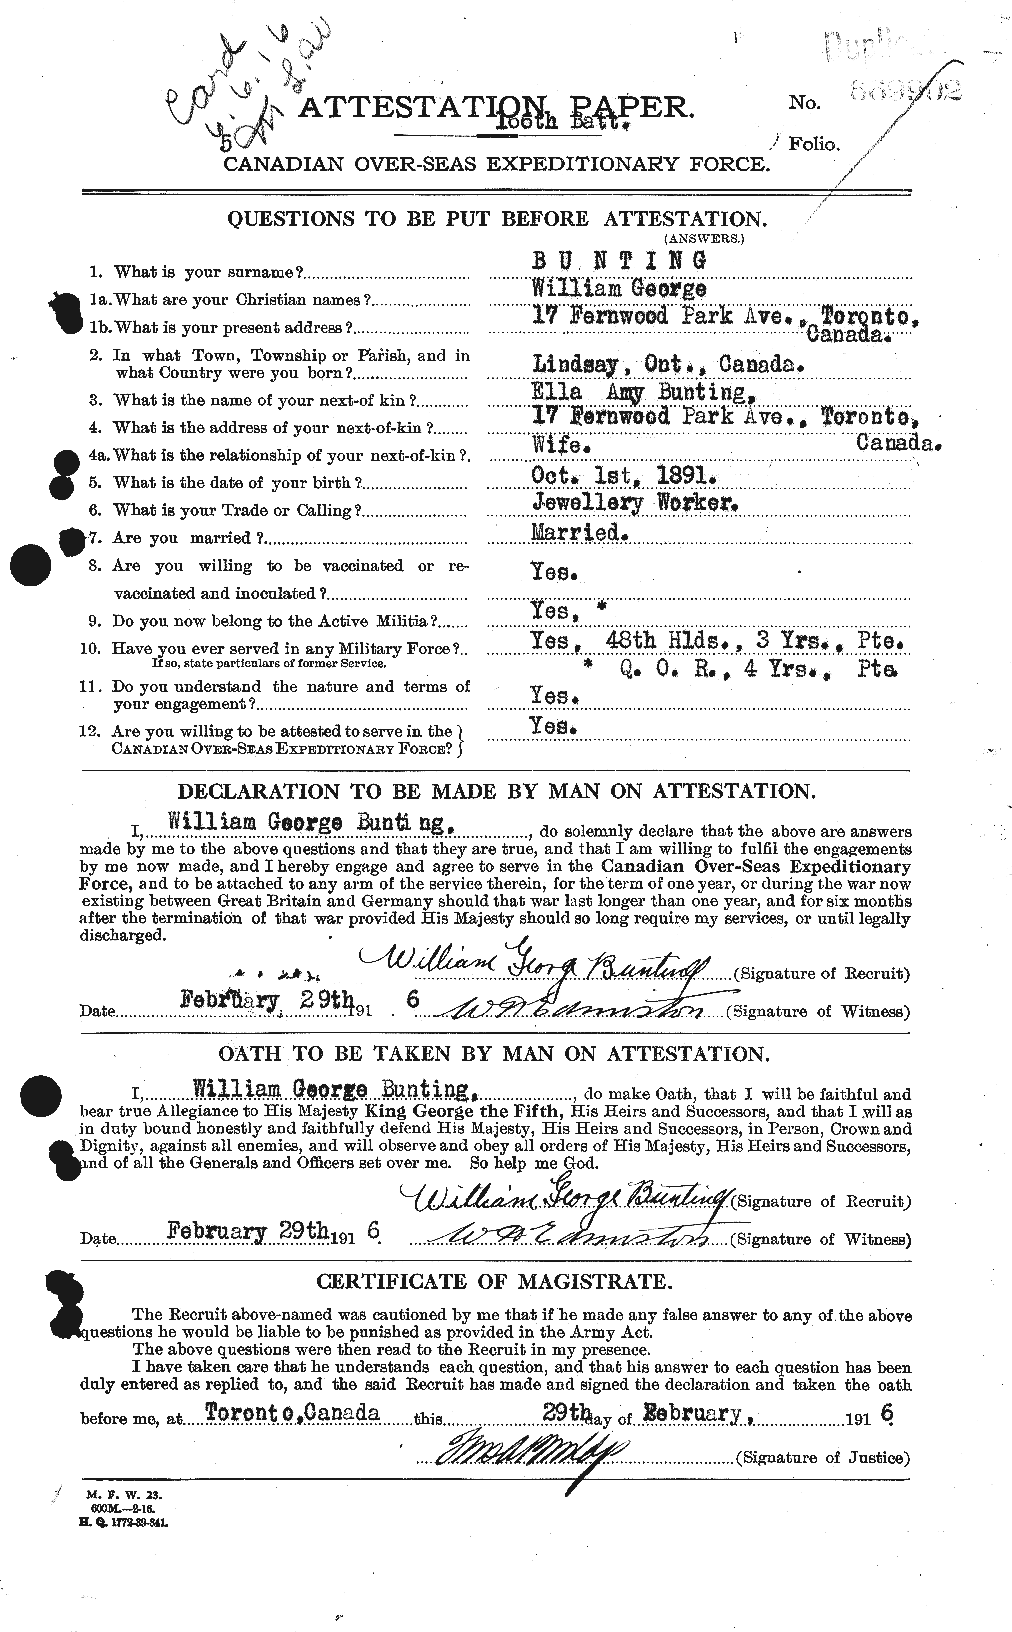 Personnel Records of the First World War - CEF 270967a